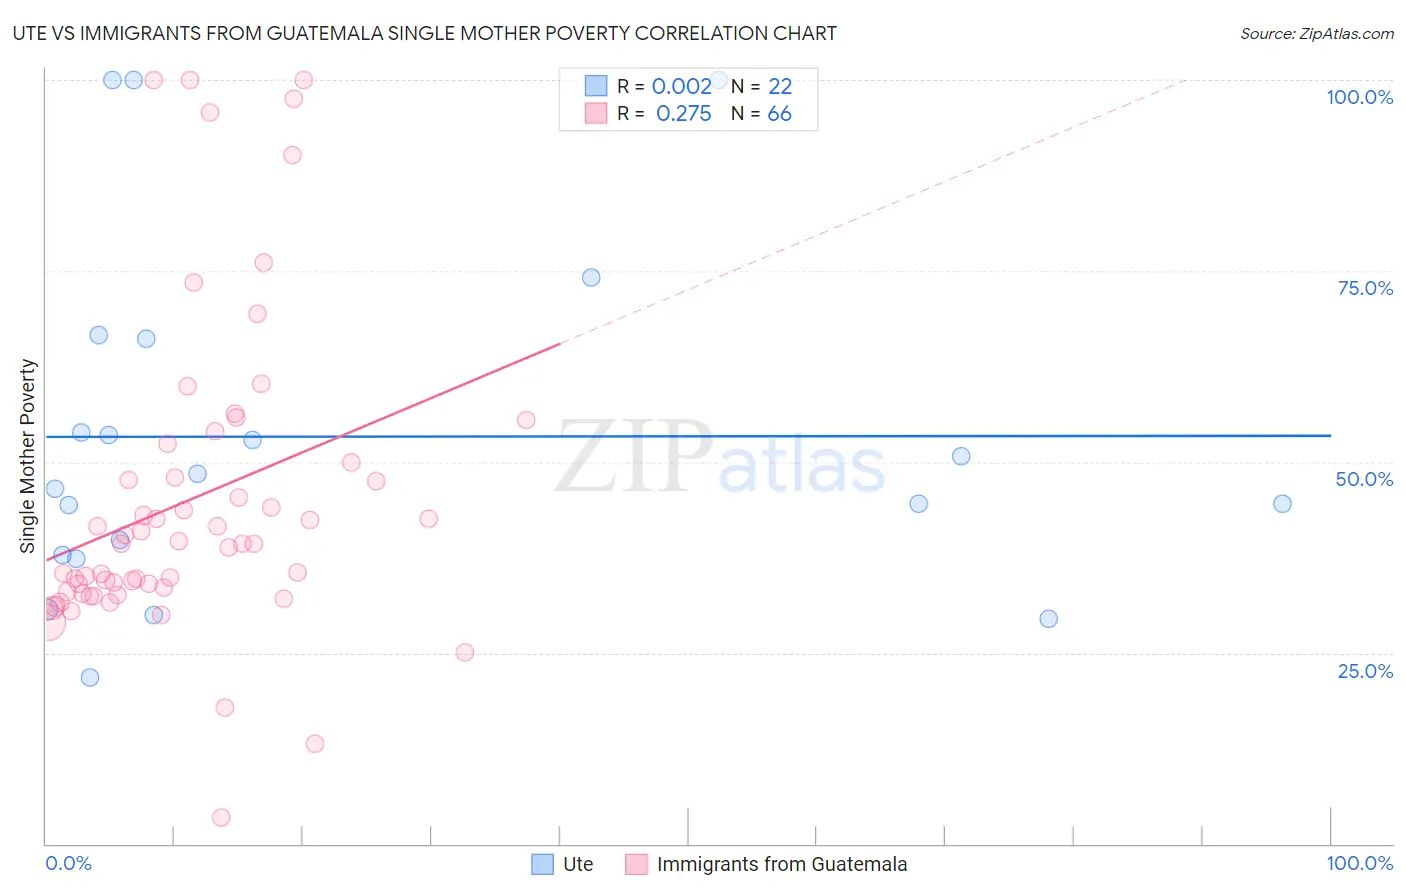 Ute vs Immigrants from Guatemala Single Mother Poverty